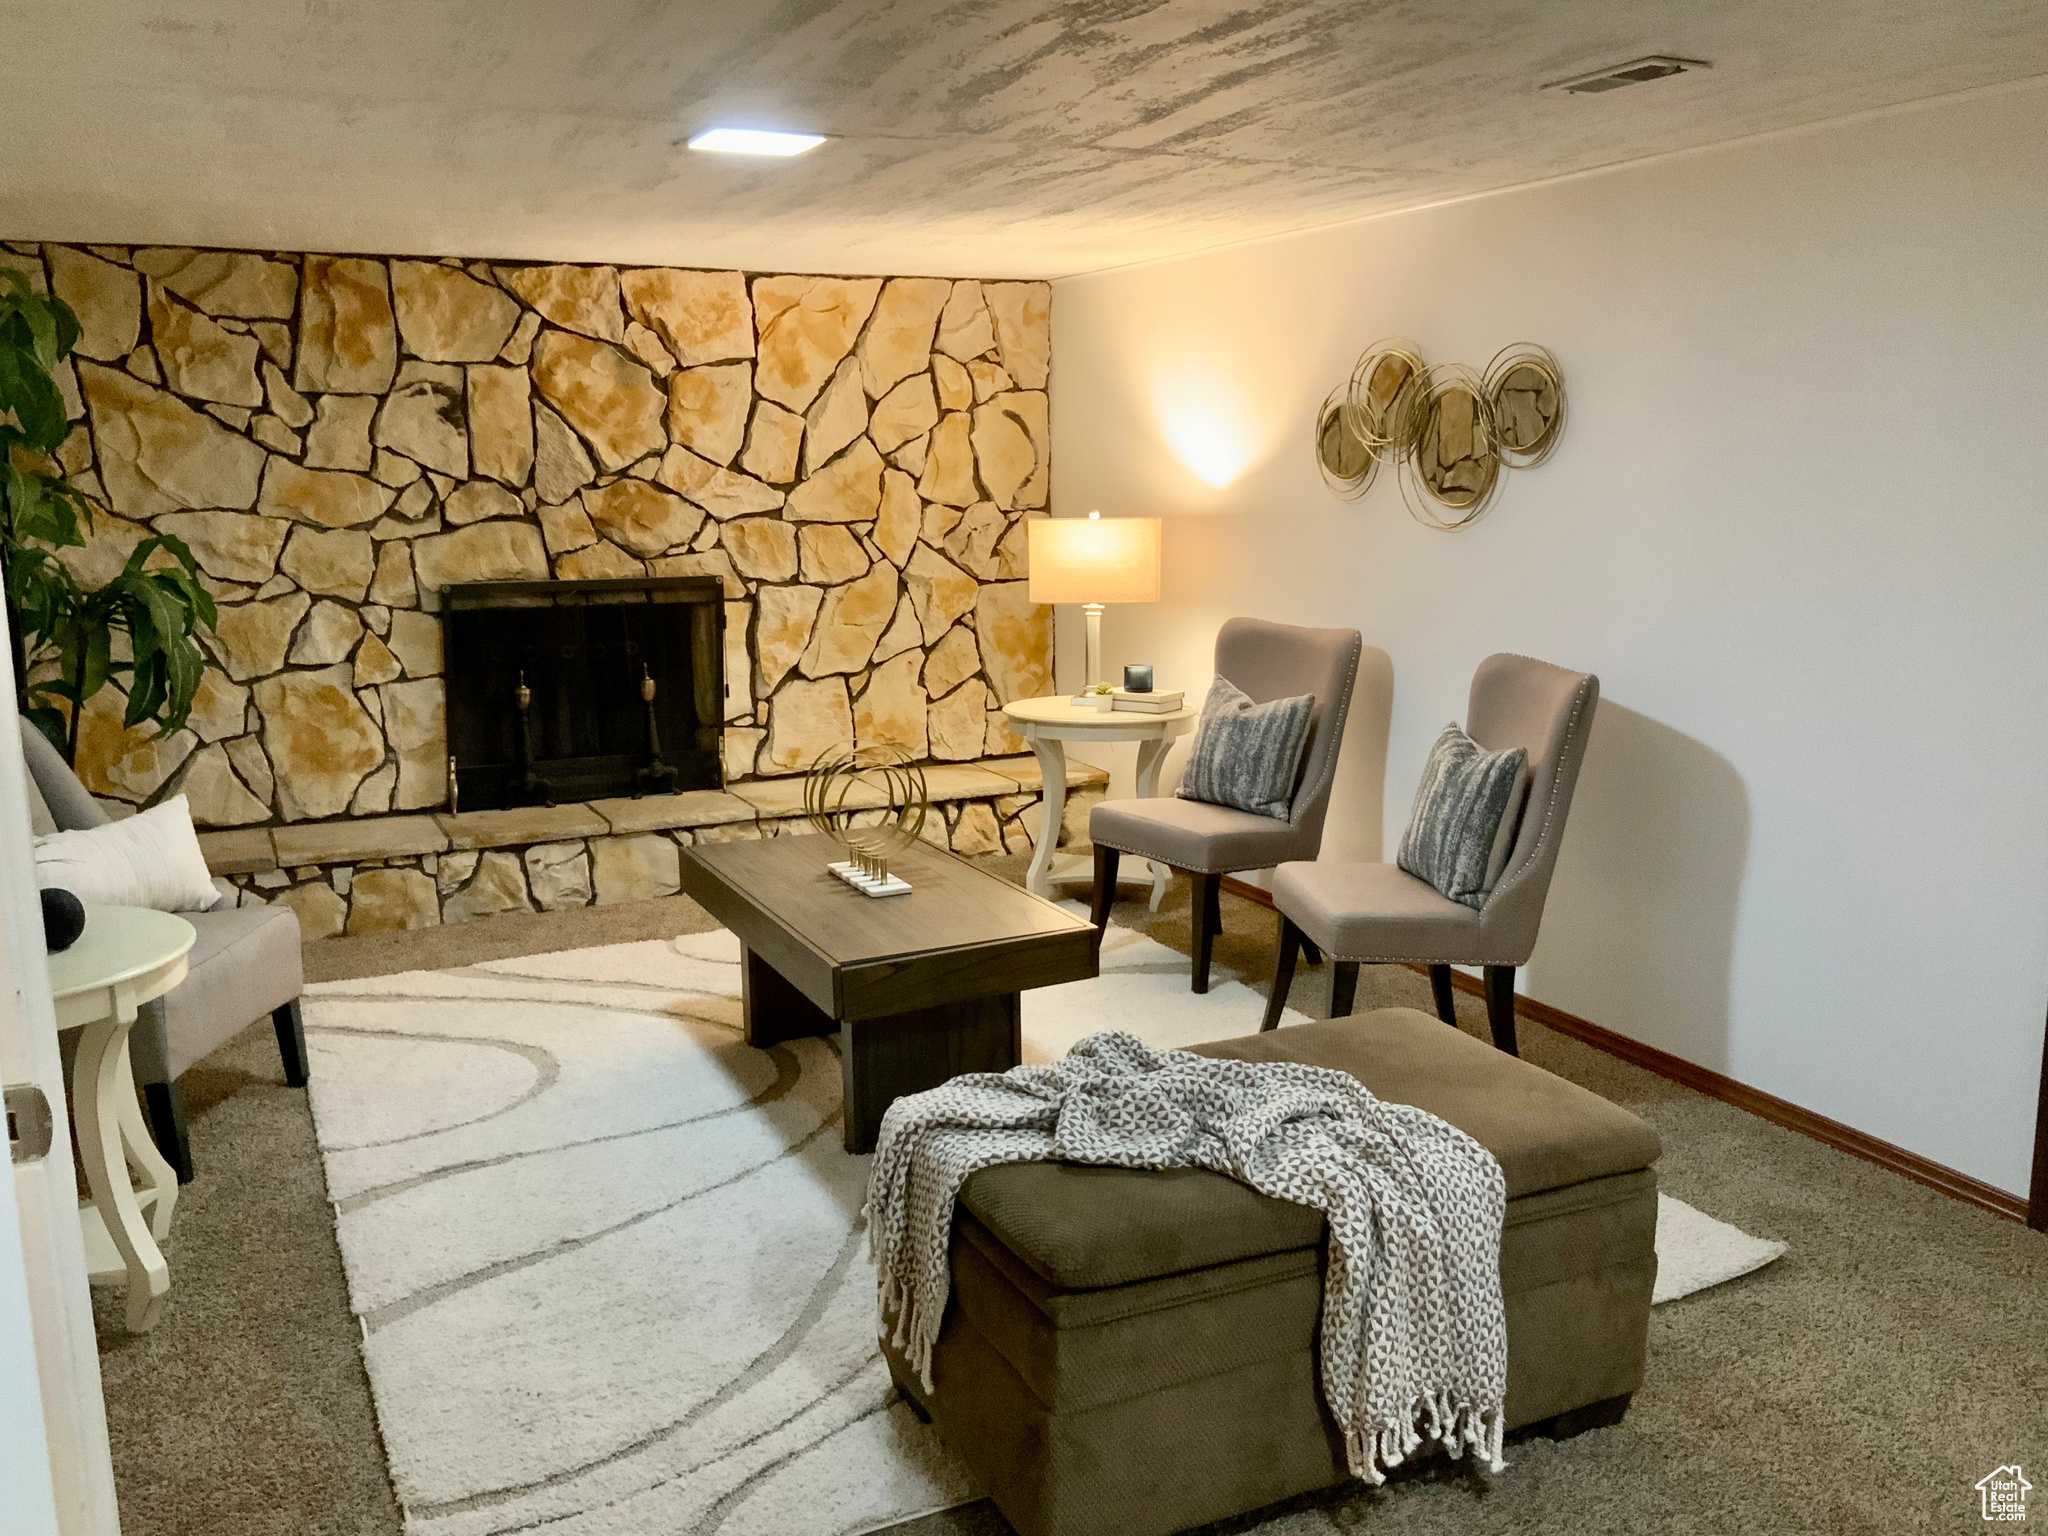 Basement family room with real wood burning fireplace